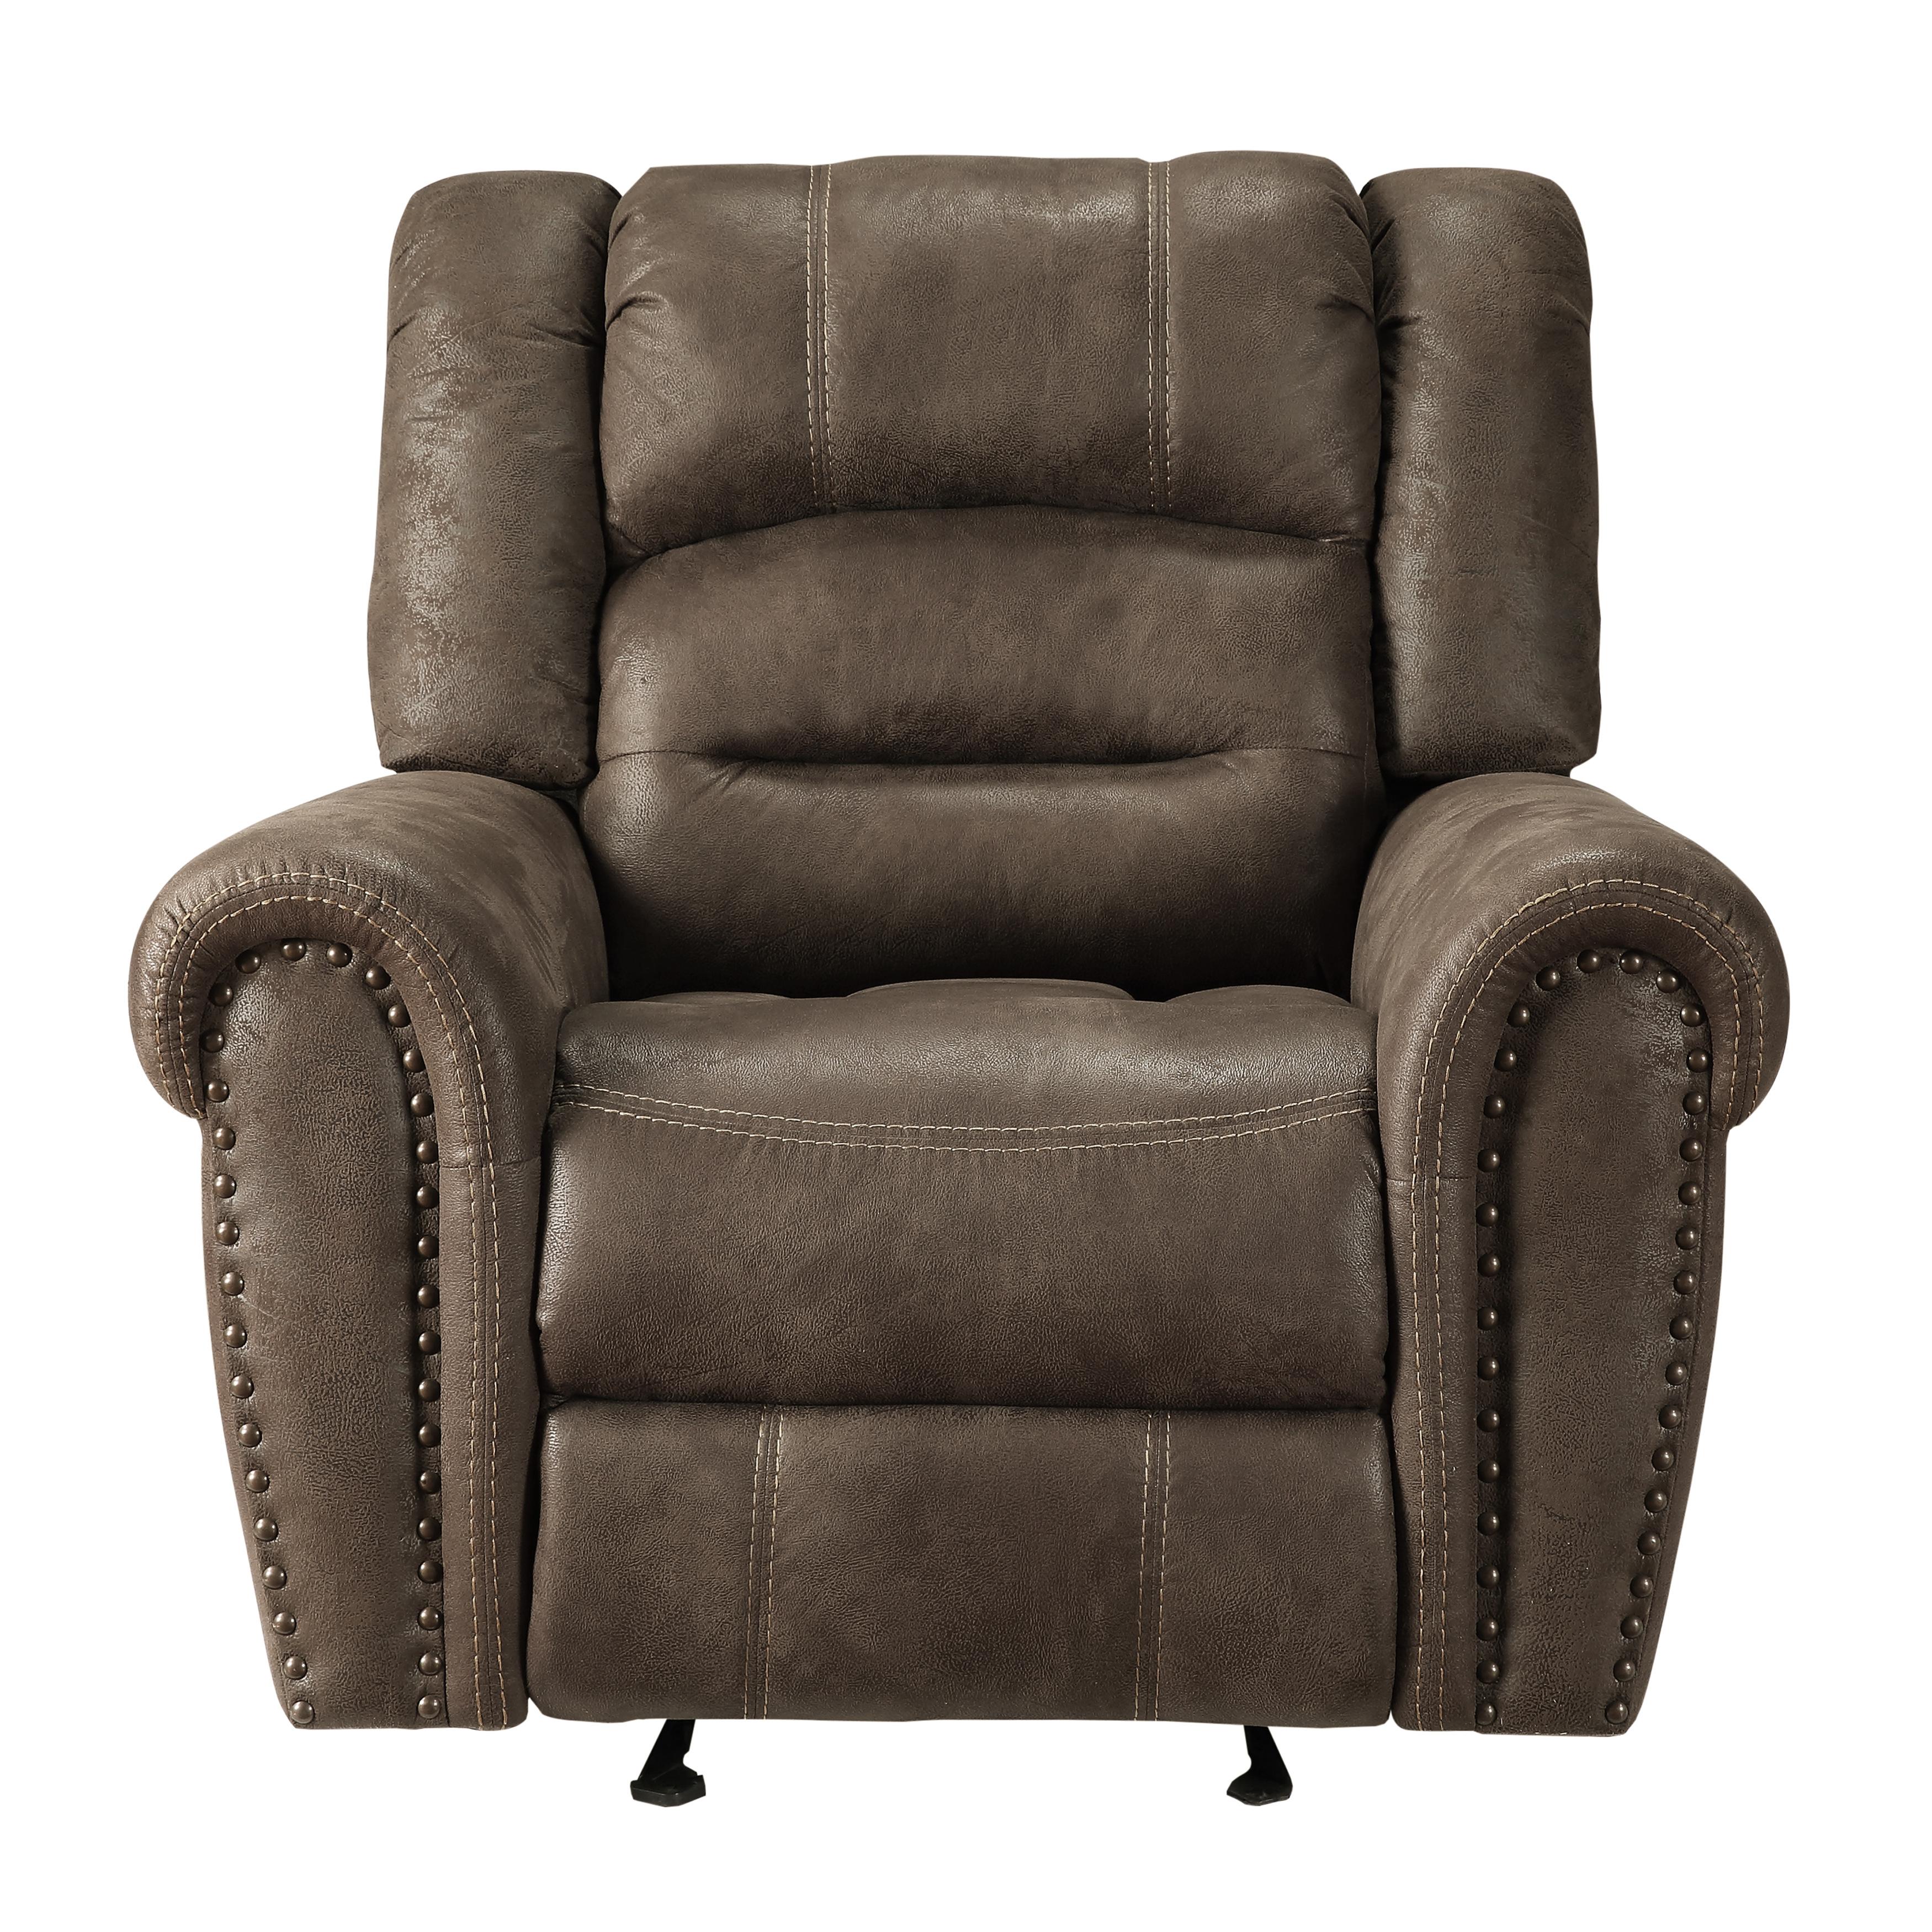 Transitional Reclining Chair 9467BR-1 Creighton 9467BR-1 in Brown Microfiber